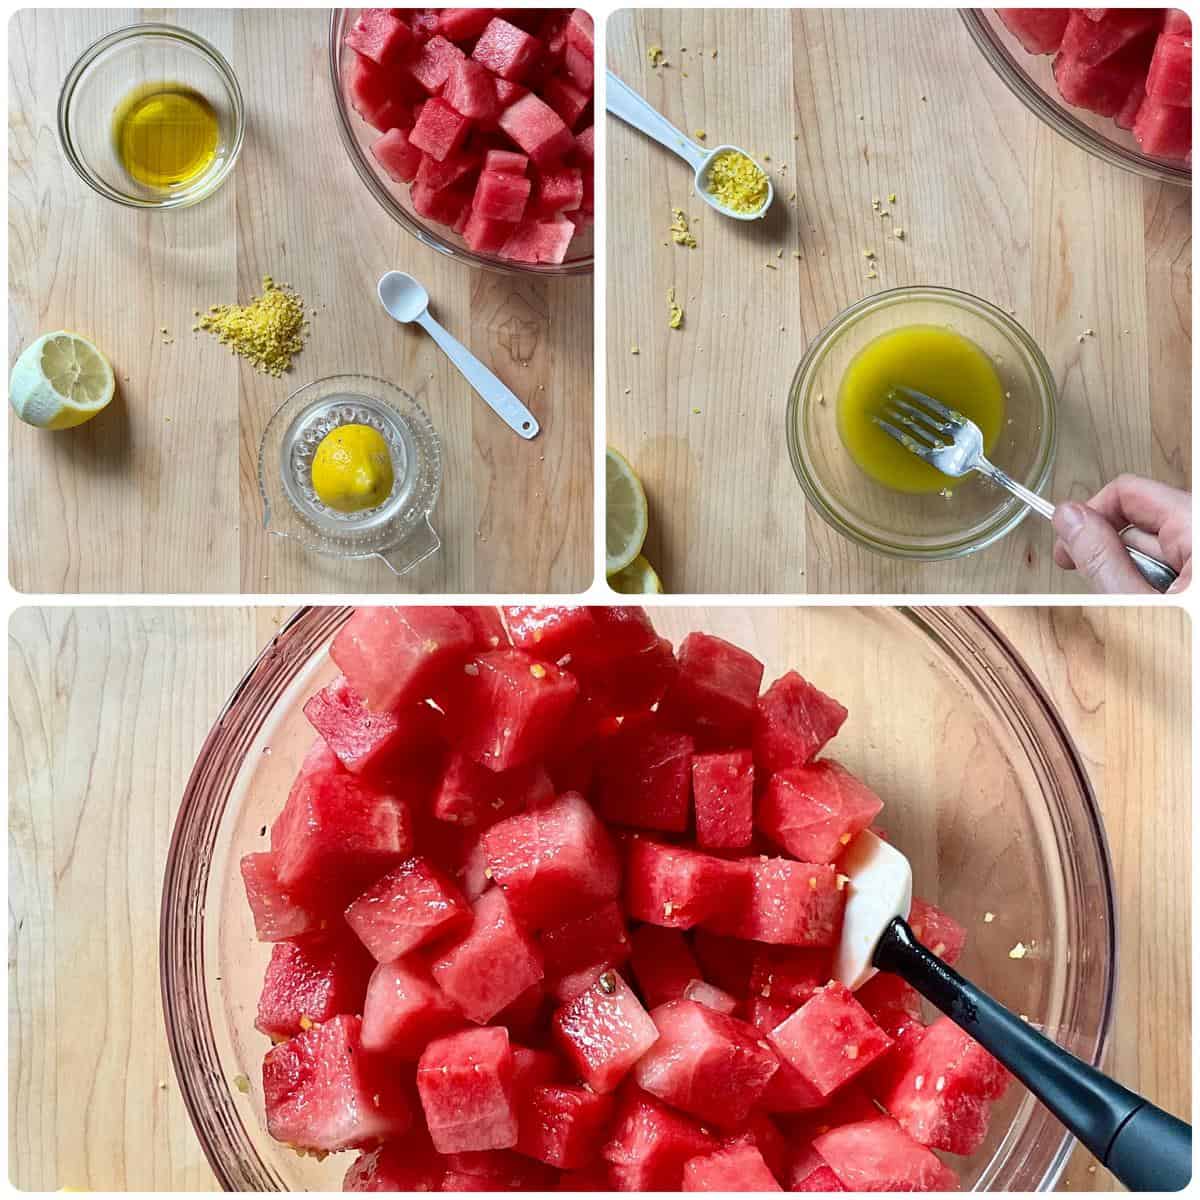 Step by step photos of the lemon vinaigrette being added to the watermelon cubes.